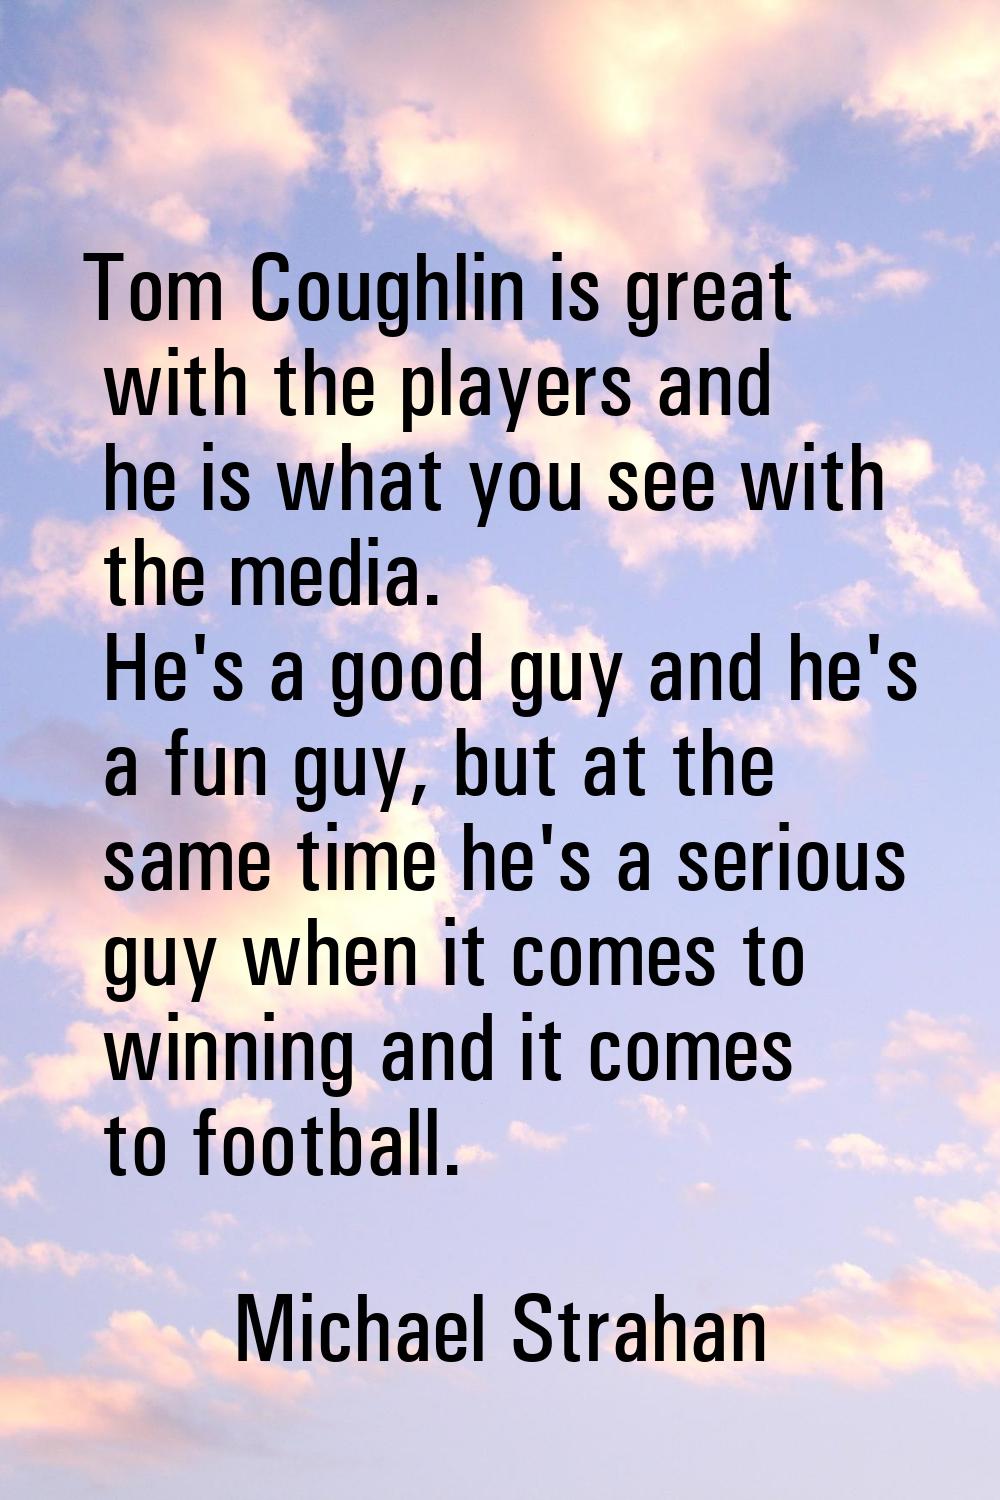 Tom Coughlin is great with the players and he is what you see with the media. He's a good guy and h